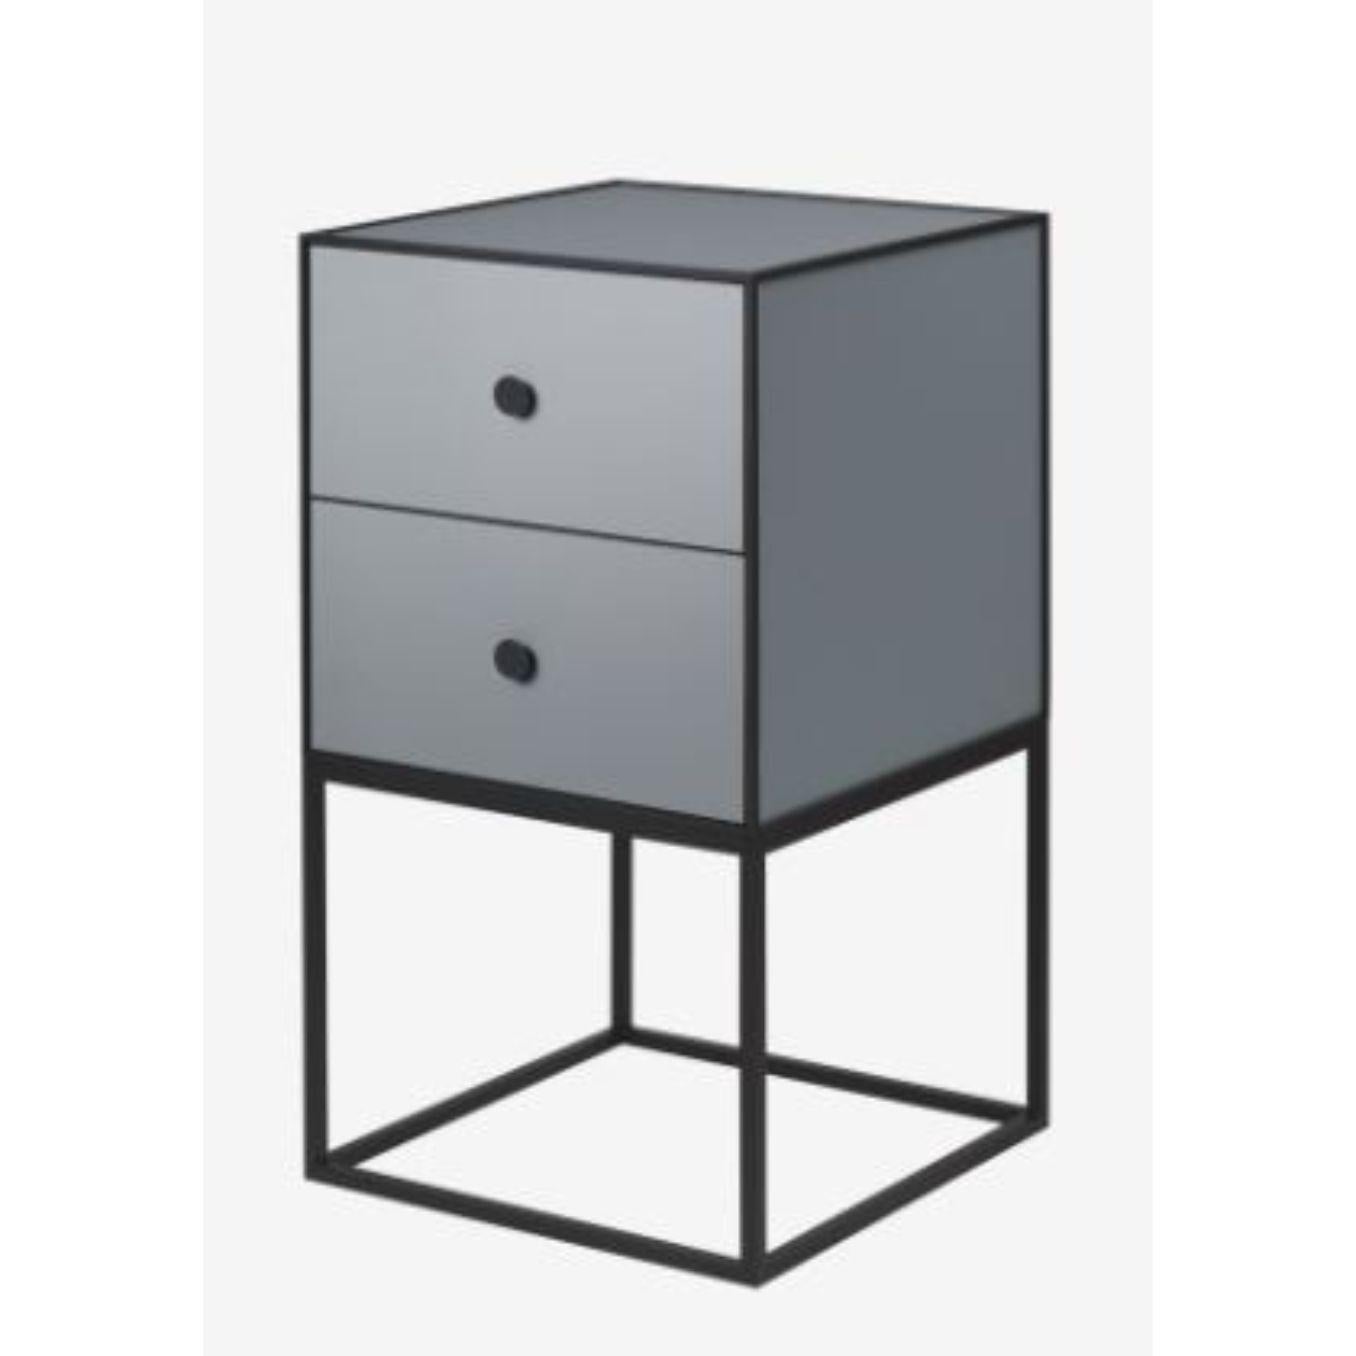 35 dark grey frame sideboard with 2 drawers by Lassen.
Dimensions: D 35 x W 35 x H 63 cm.
Materials: Finér, Melamin, Melamine, Metal, Veneer
Also available in different colours and dimensions.
Weight: 15.50 Kg

By Lassen is a Danish design